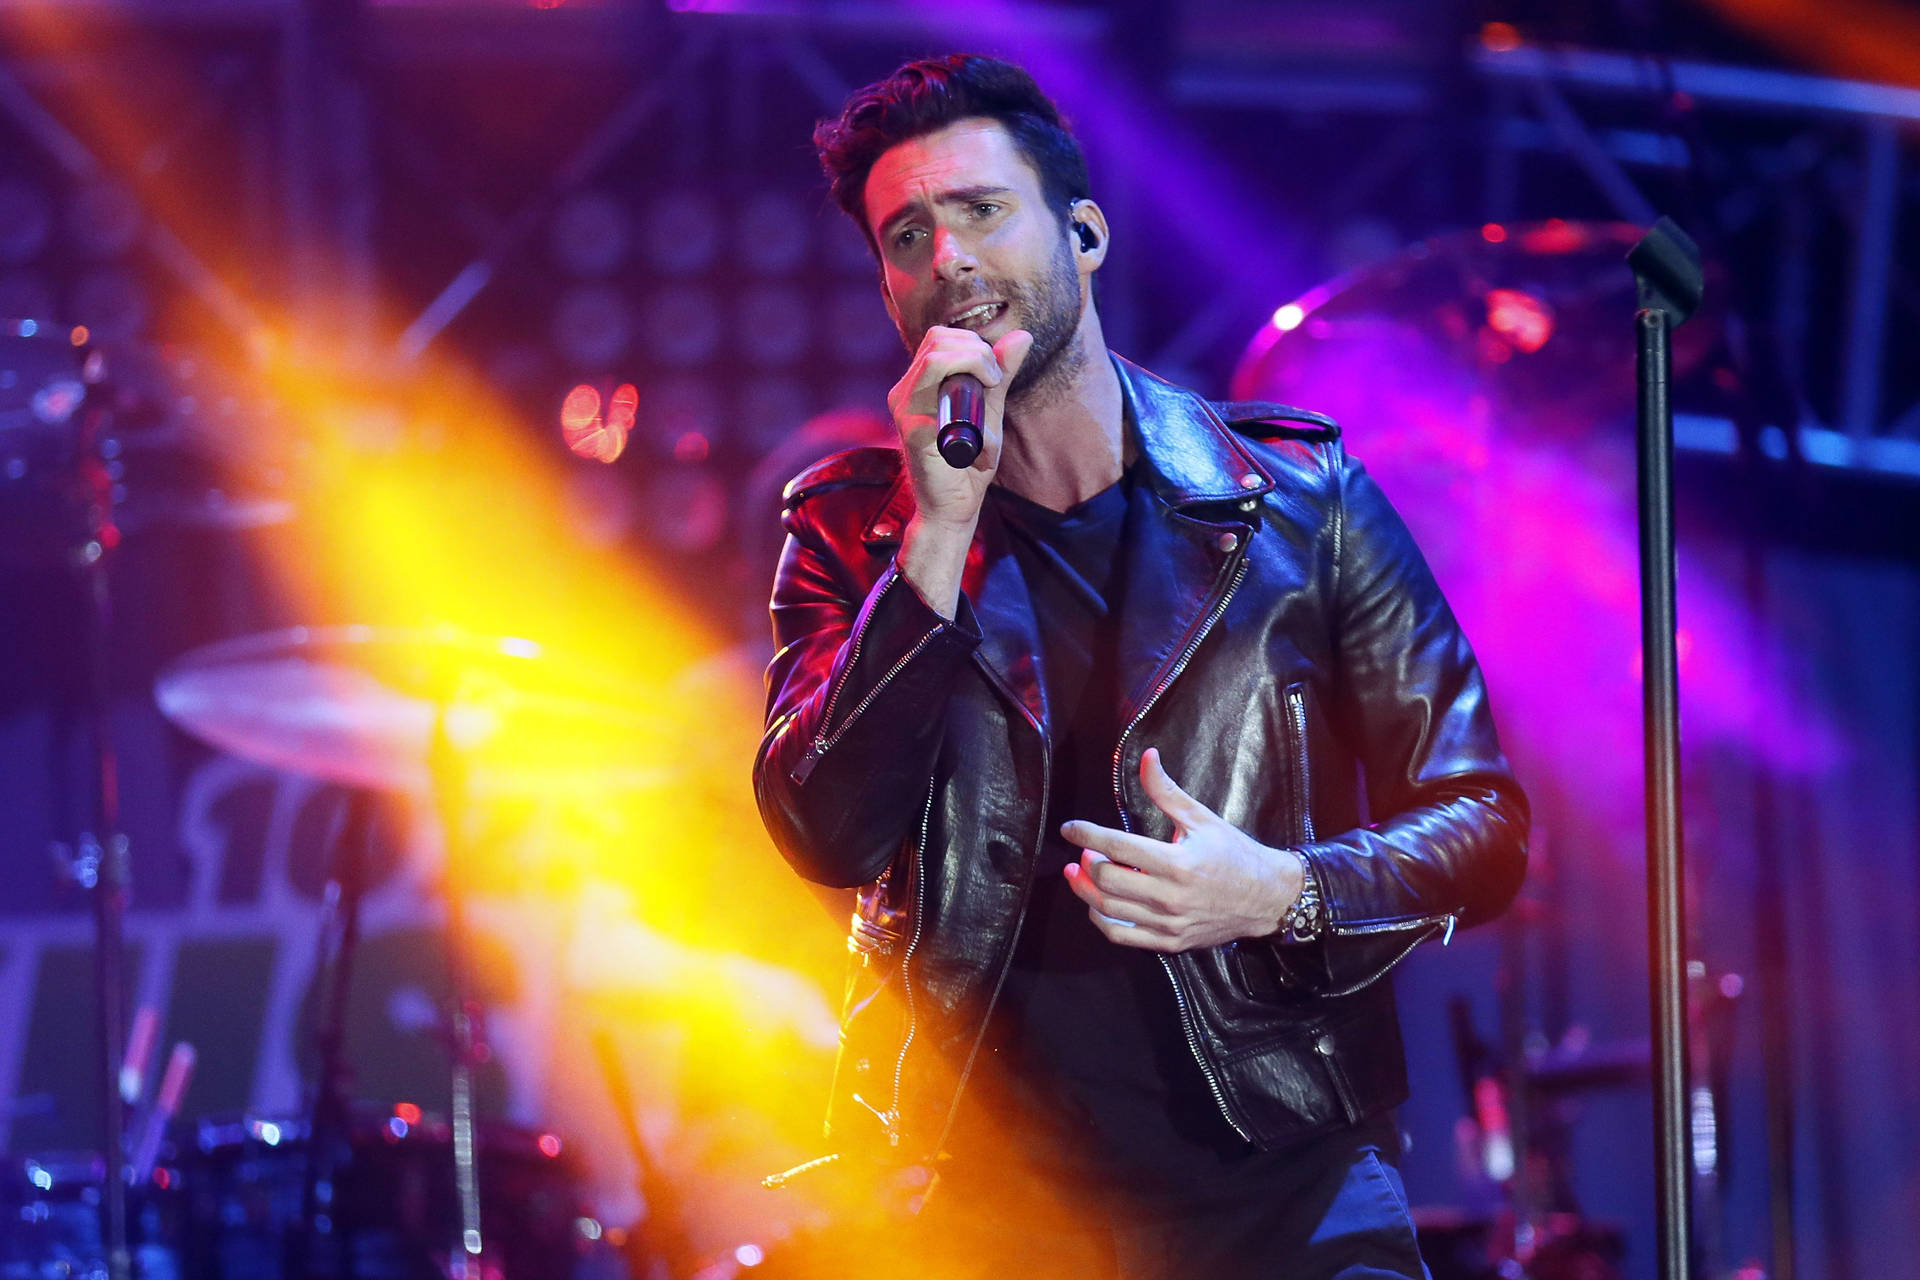 Adam Levine Flaunting his Style in a Black Leather Jacket Wallpaper